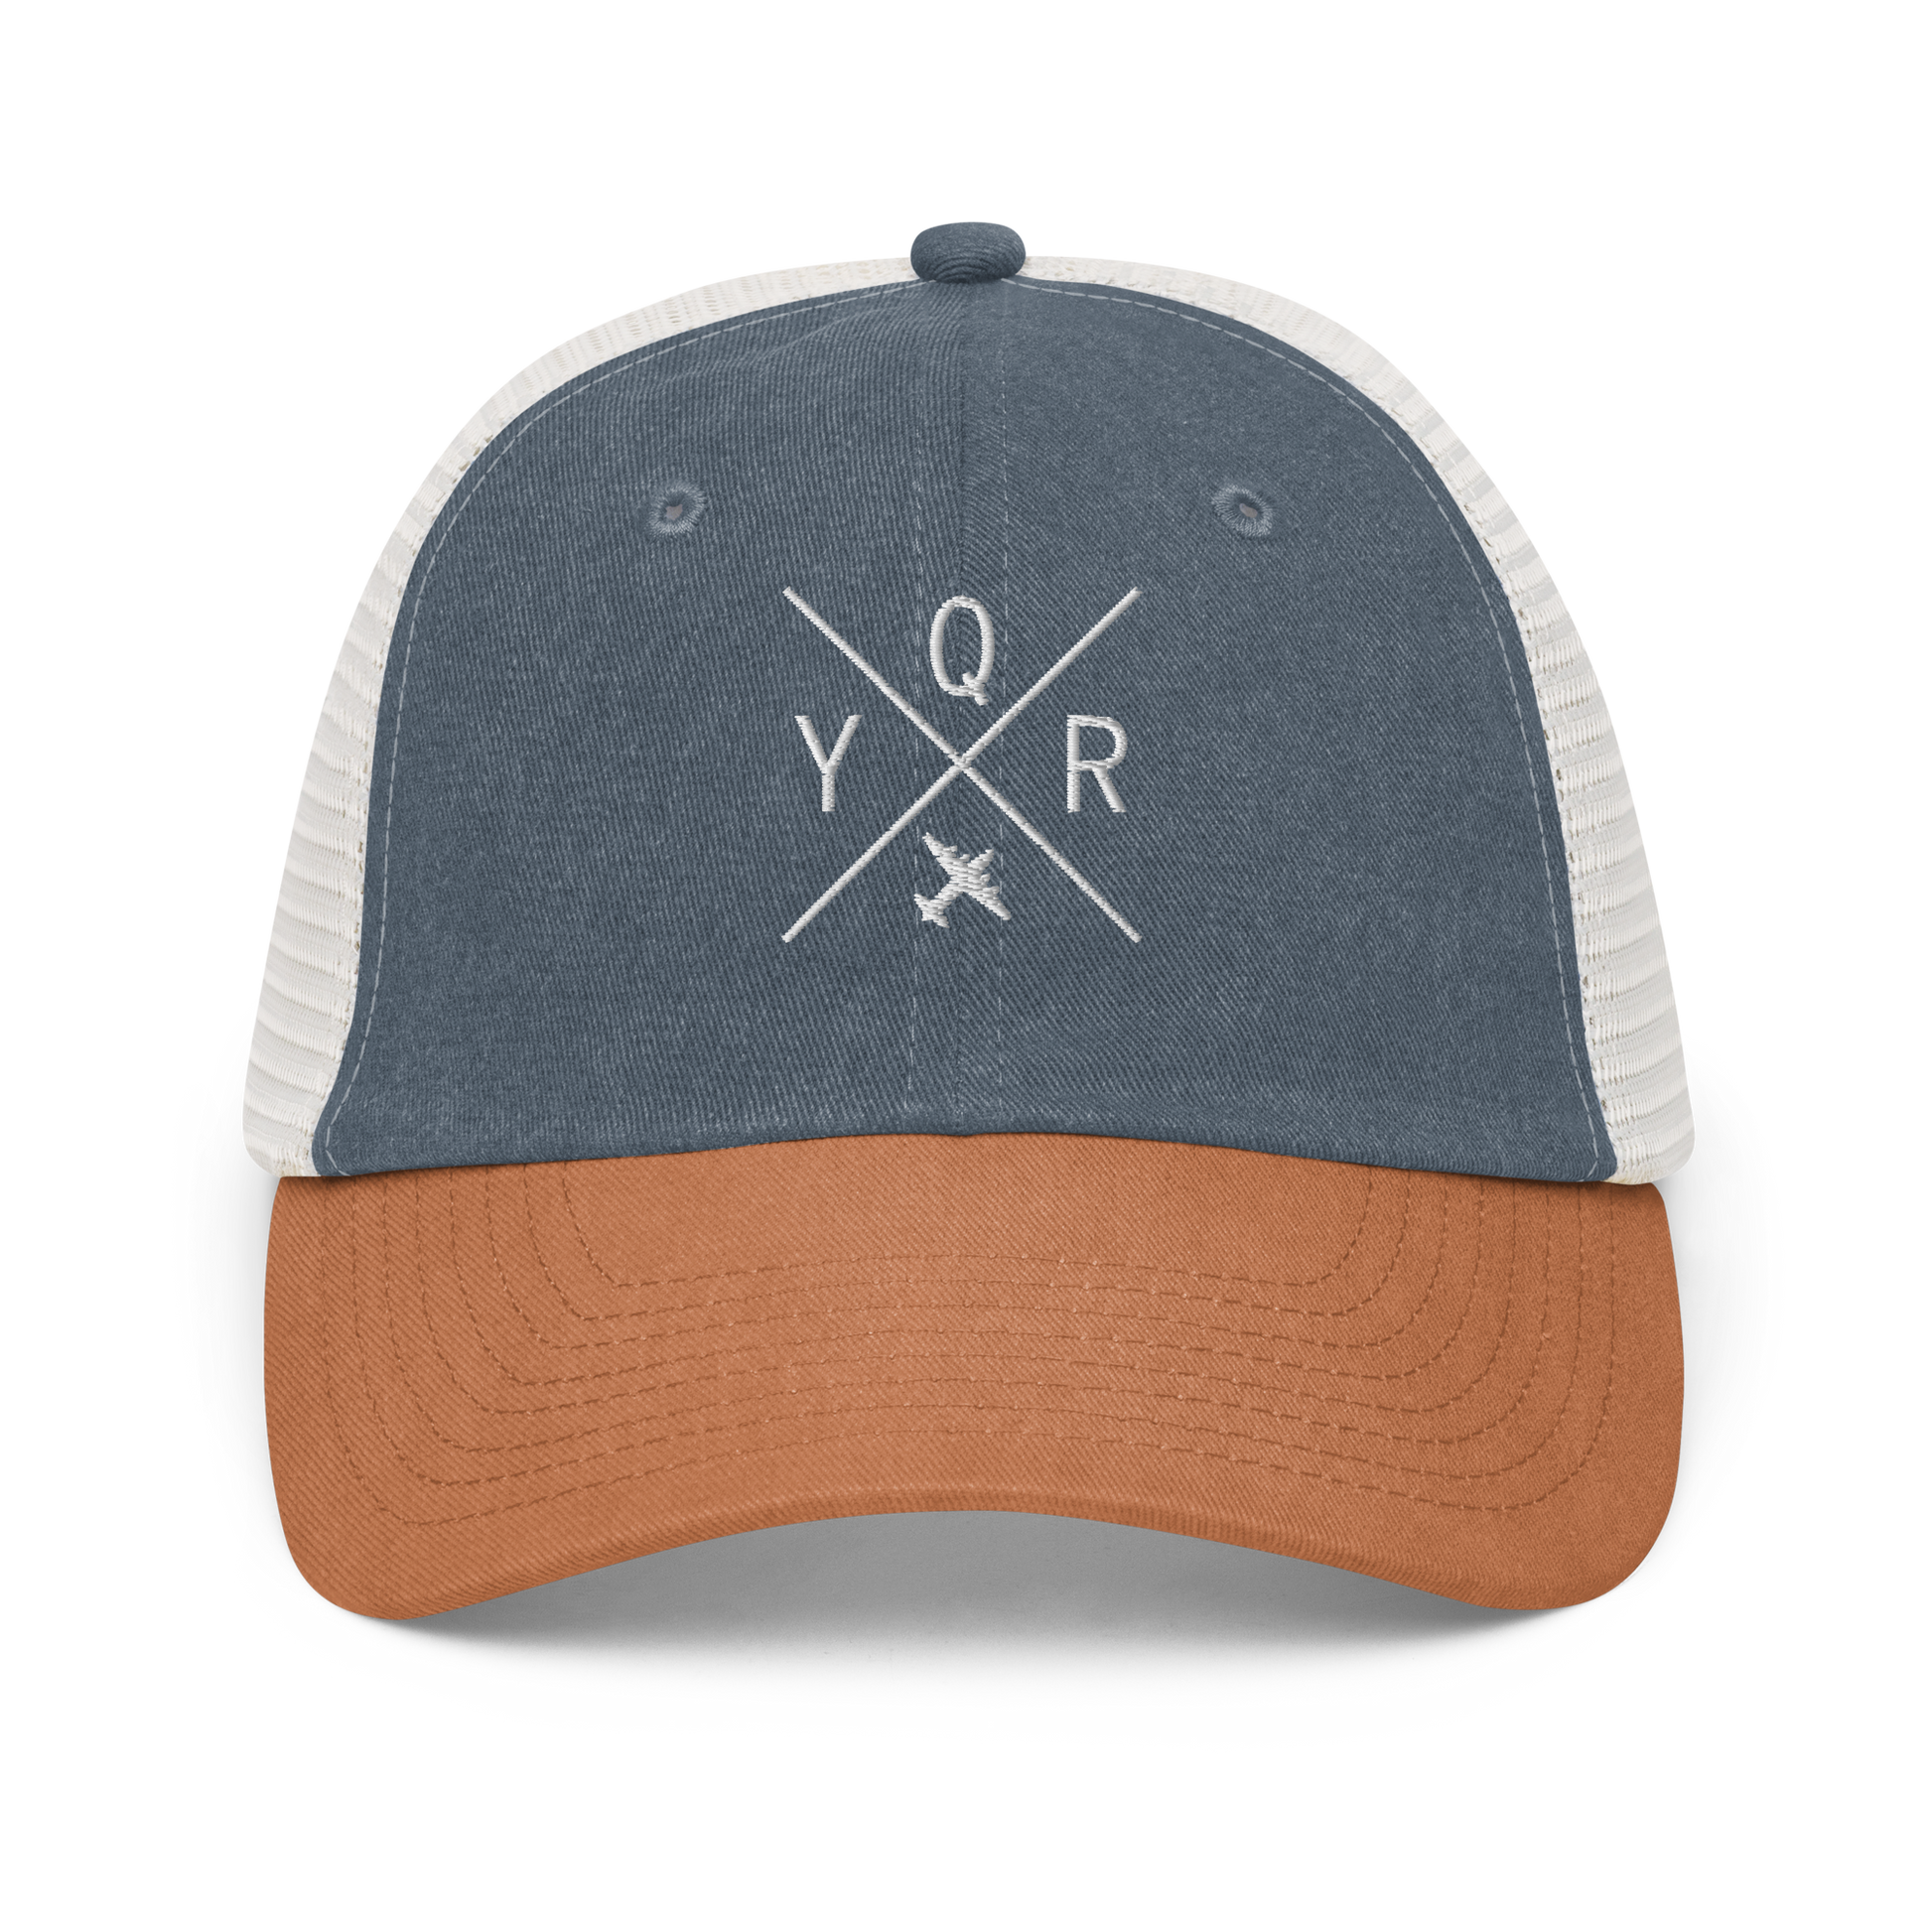 YHM Designs - YQR Regina Pigment-Dyed Trucker Cap - Crossed-X Design with Airport Code and Vintage Propliner - White Embroidery - Image 15